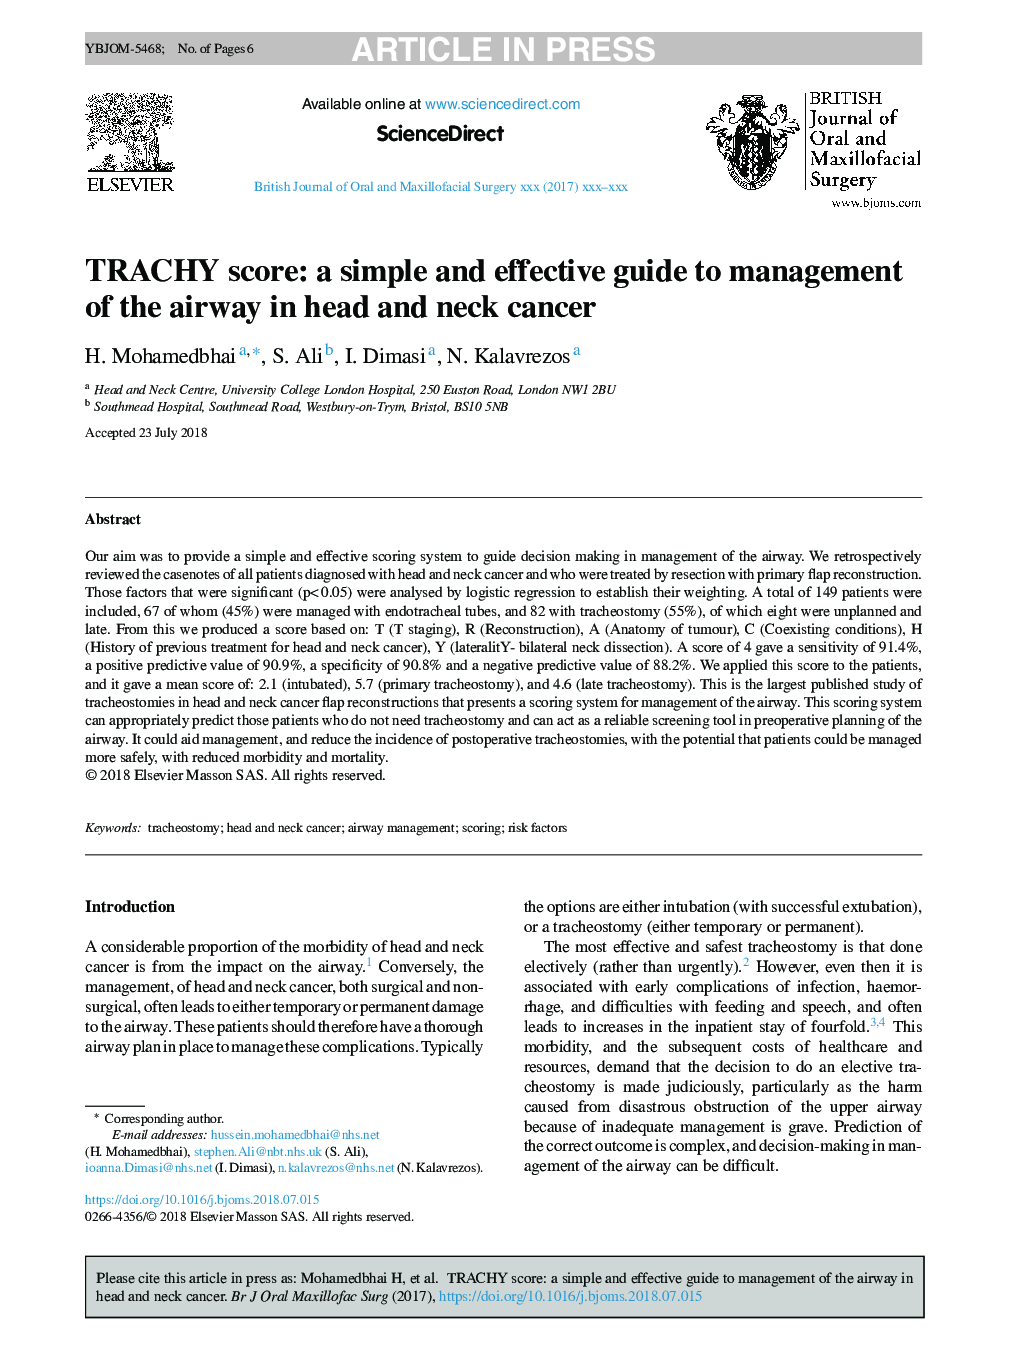 TRACHY score: a simple and effective guide to management of the airway in head and neck cancer